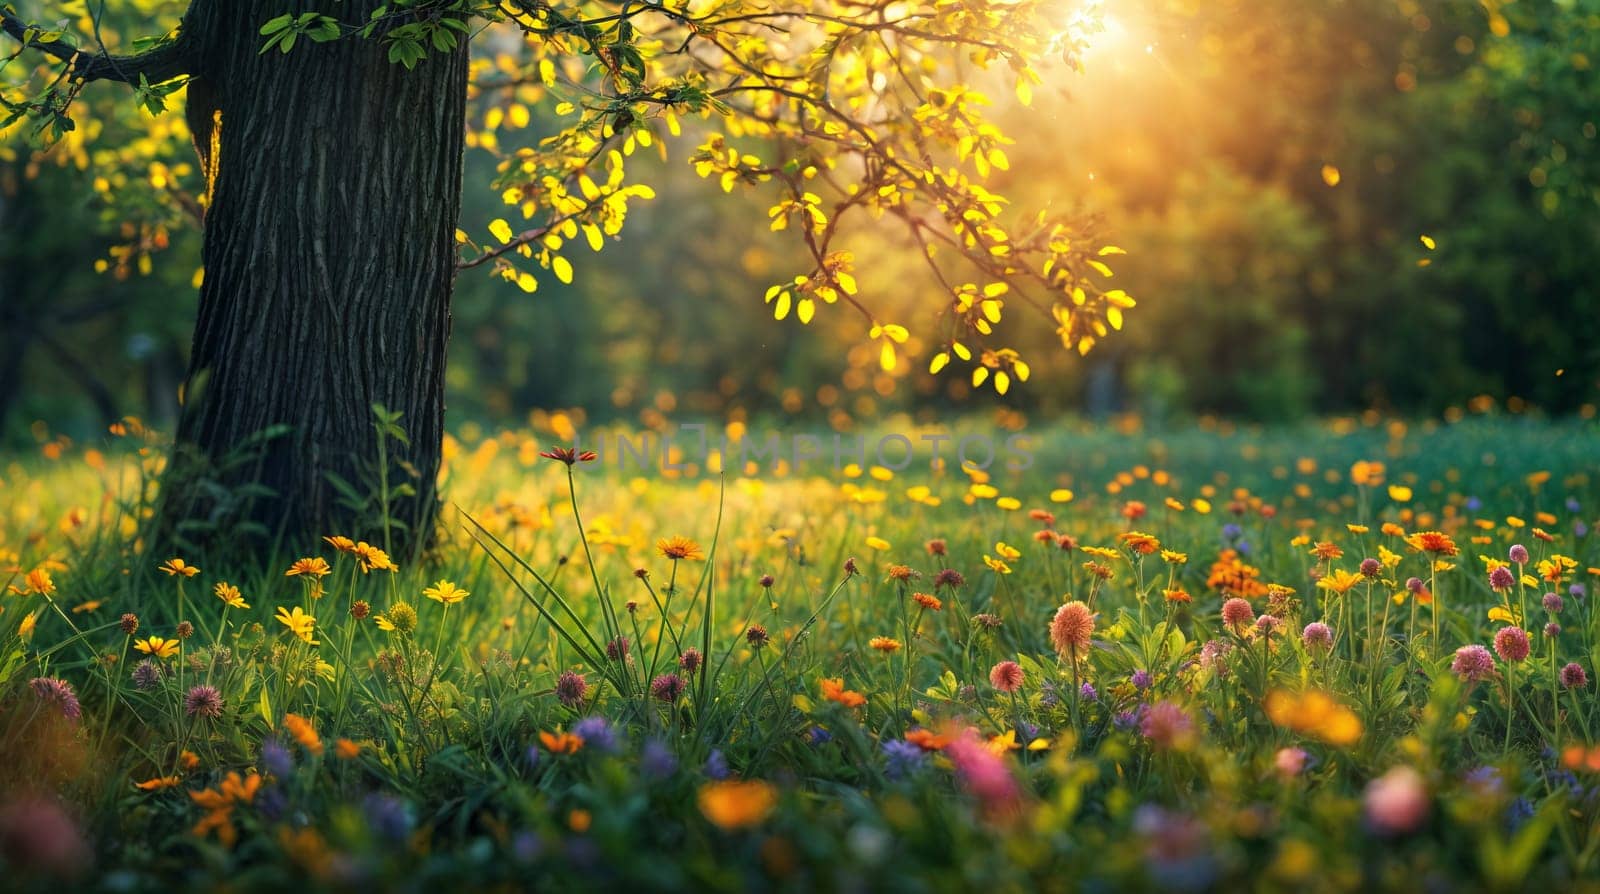 Sunlight filters through the leaves of a tree, casting a warm glow over a meadow adorned with wildflowers - Generative AI